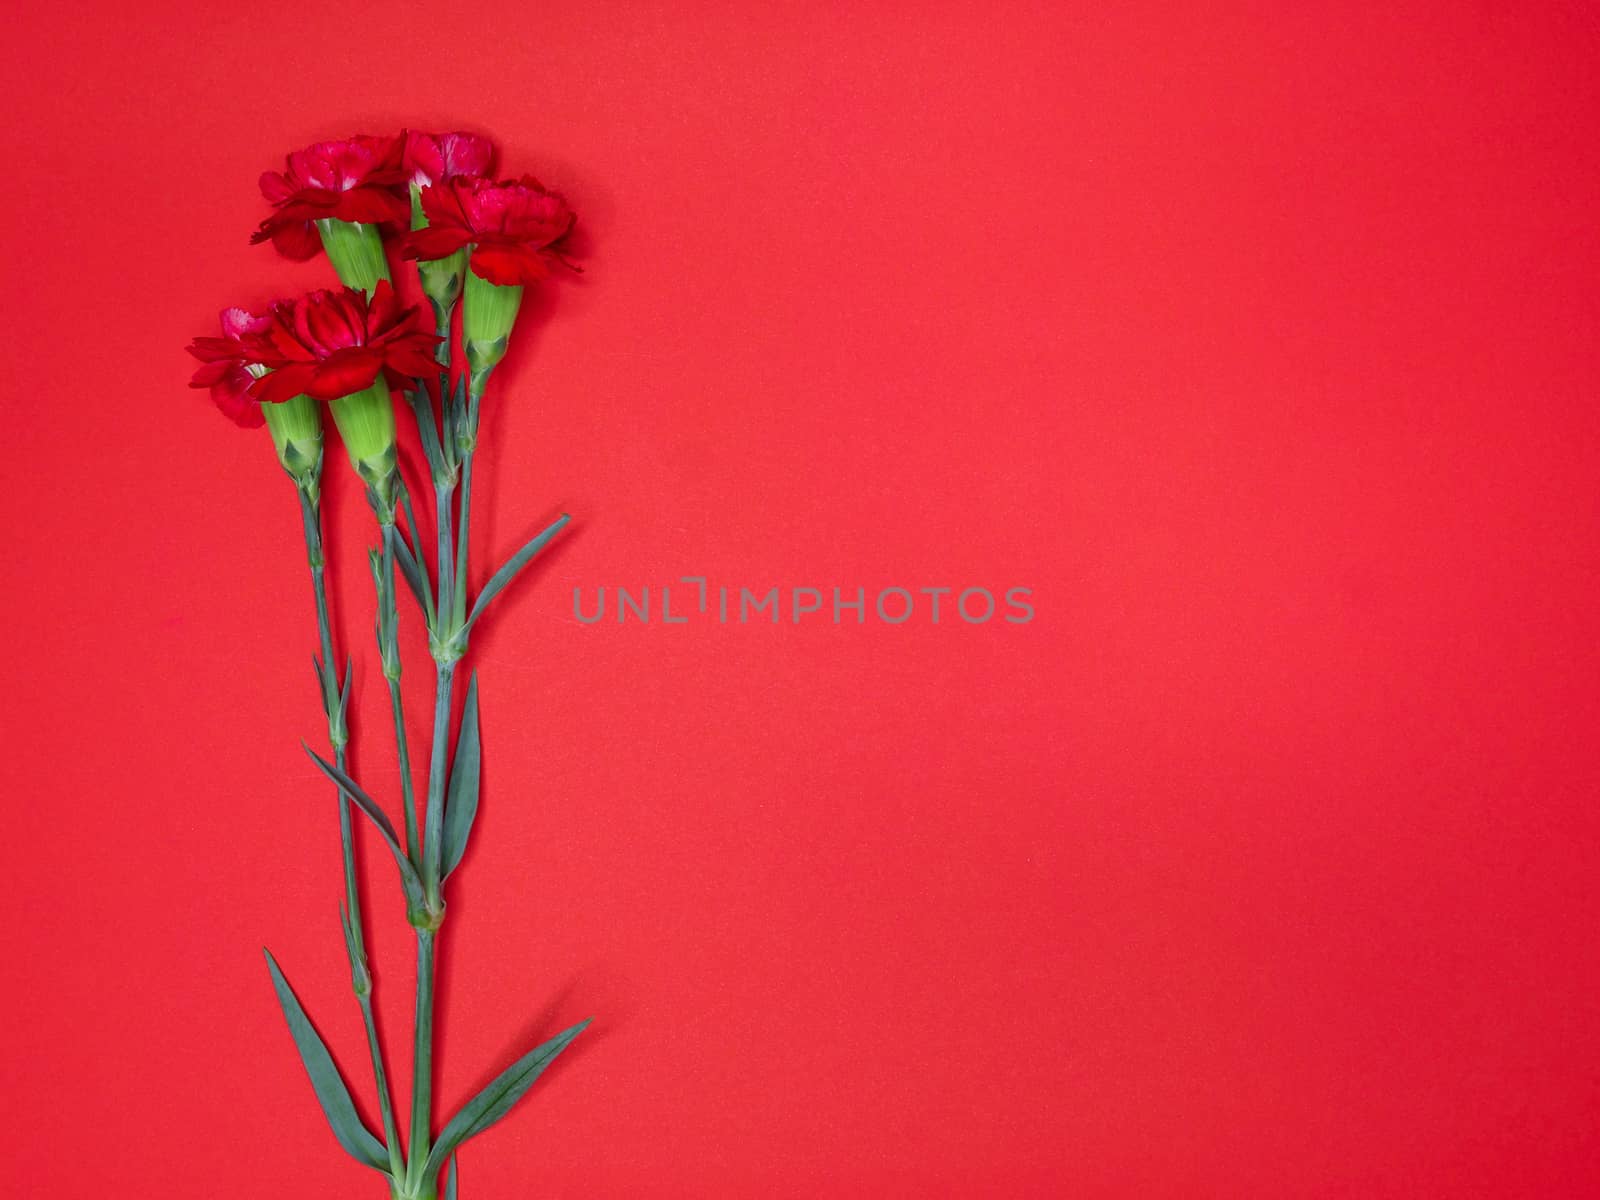 a bouquet of red carnations on bright red poster paper background